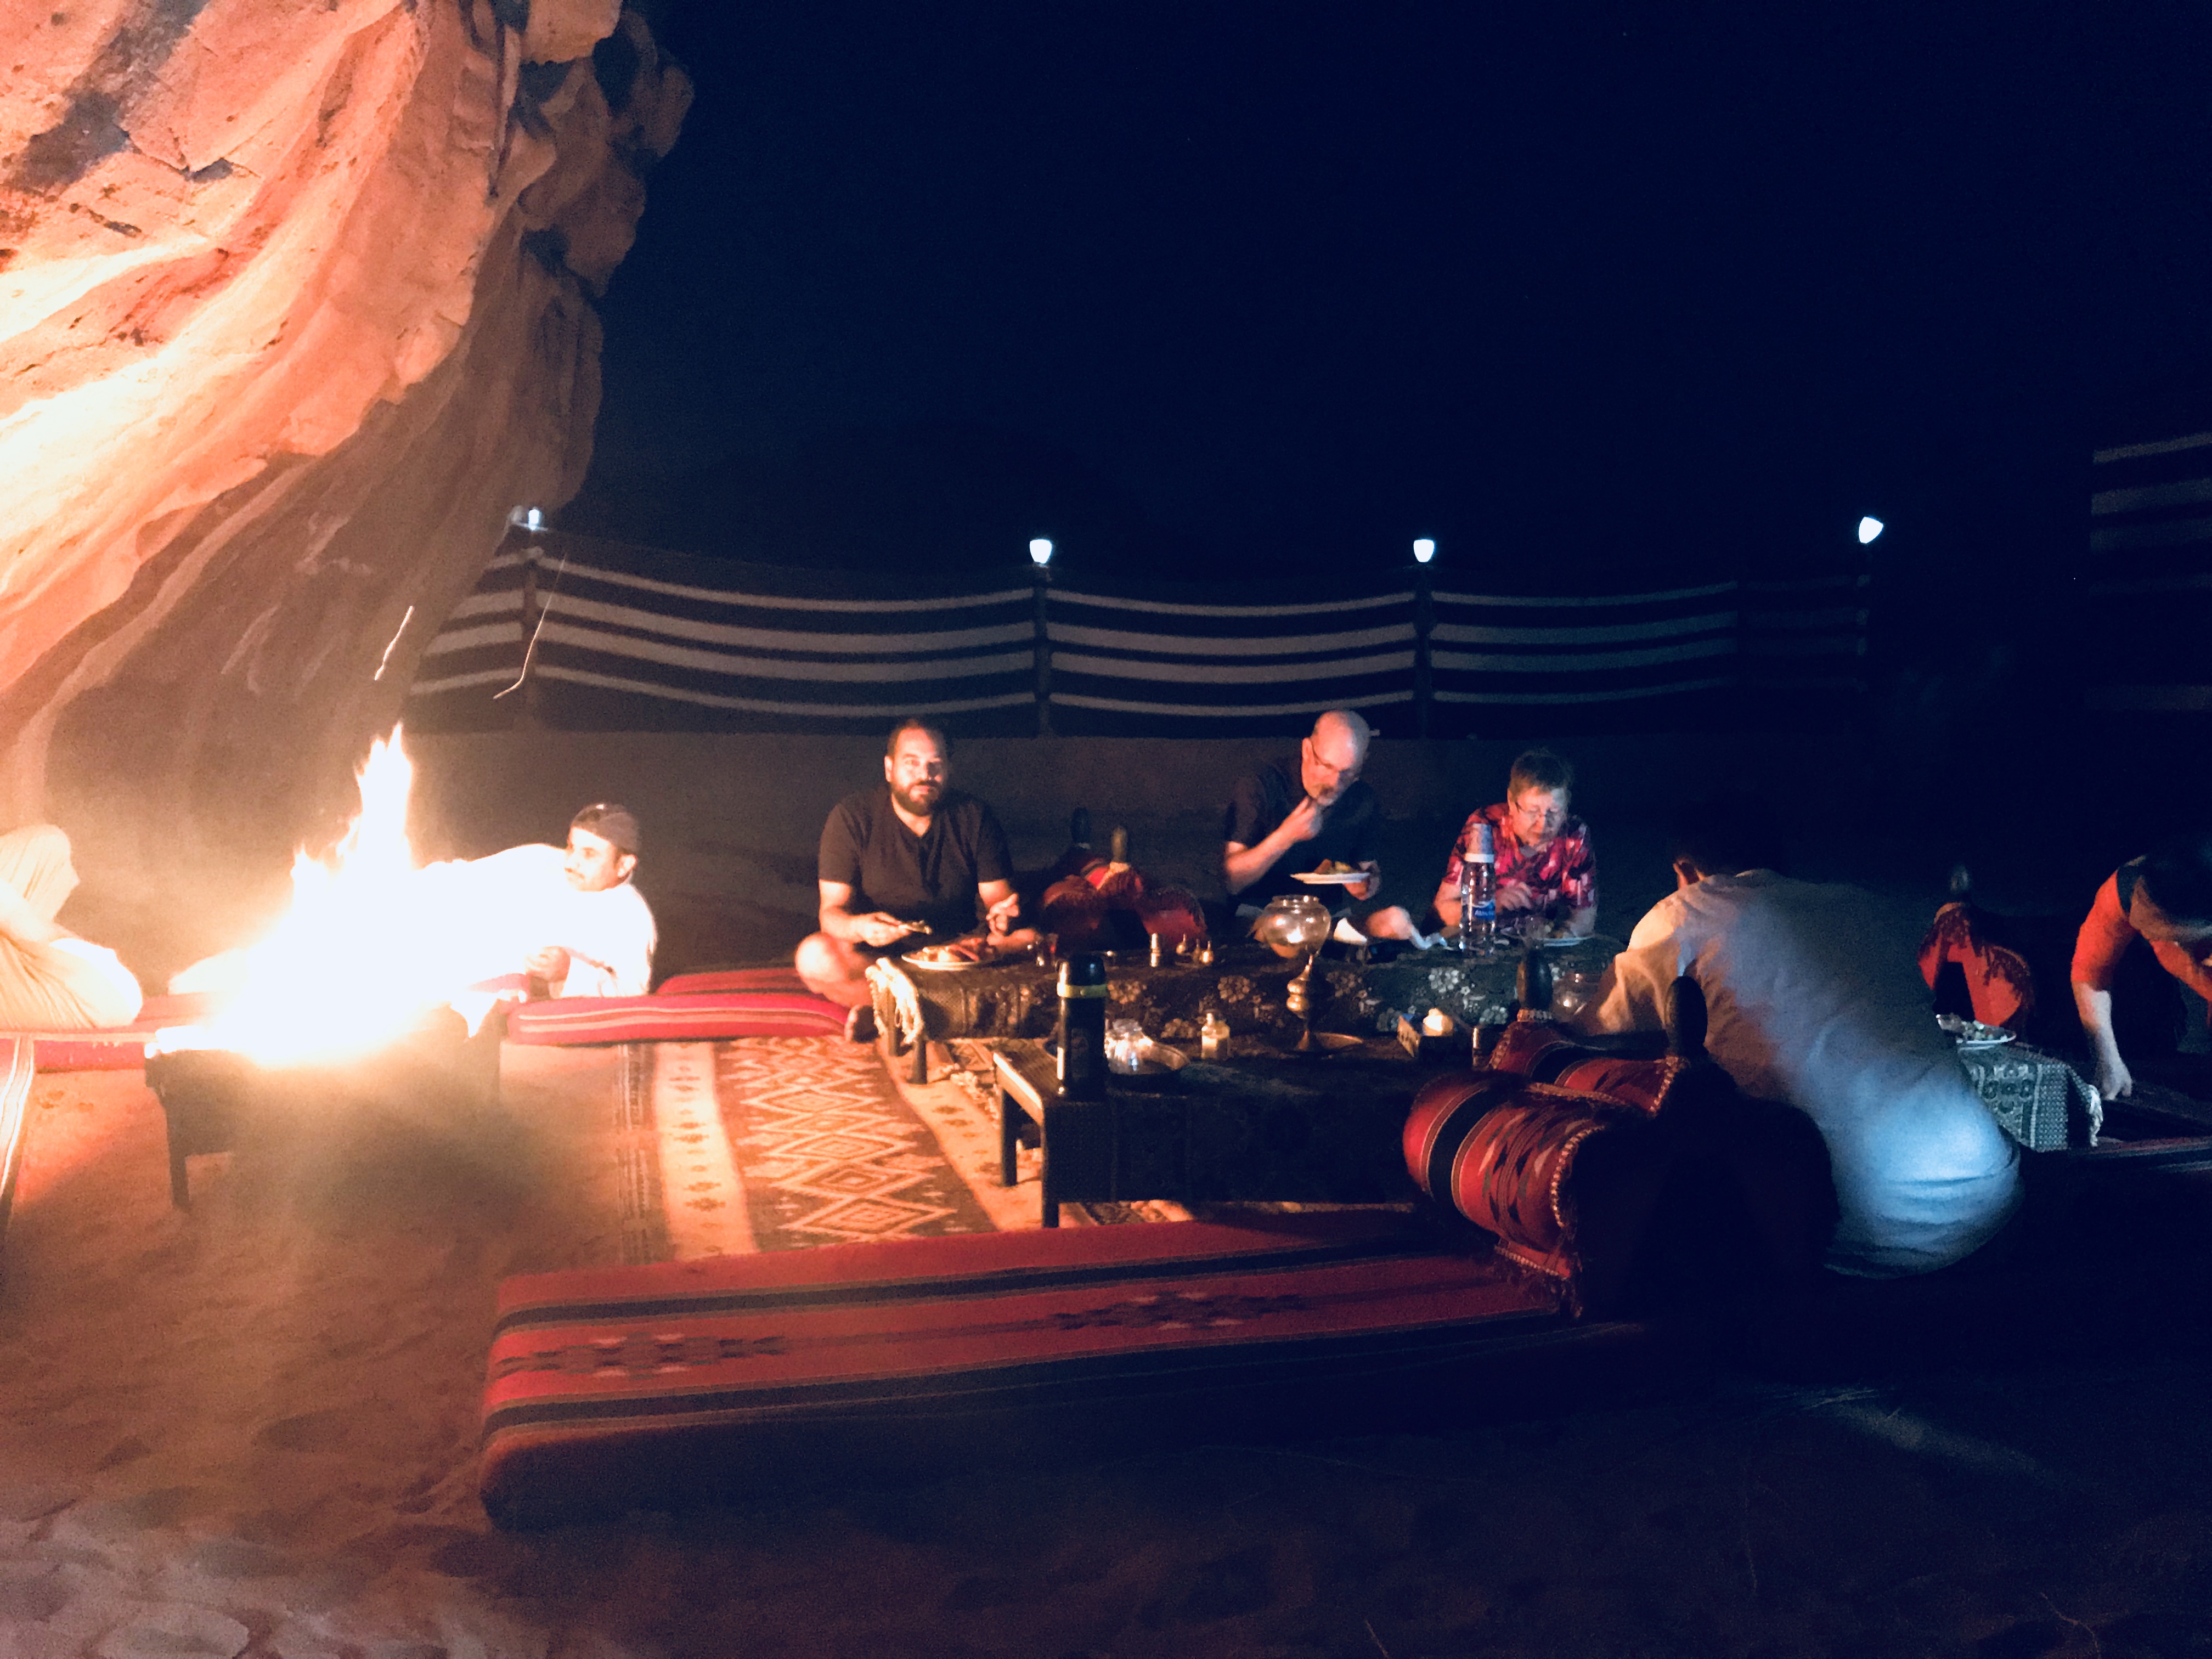 sitting place at the camp -Wadi Rum